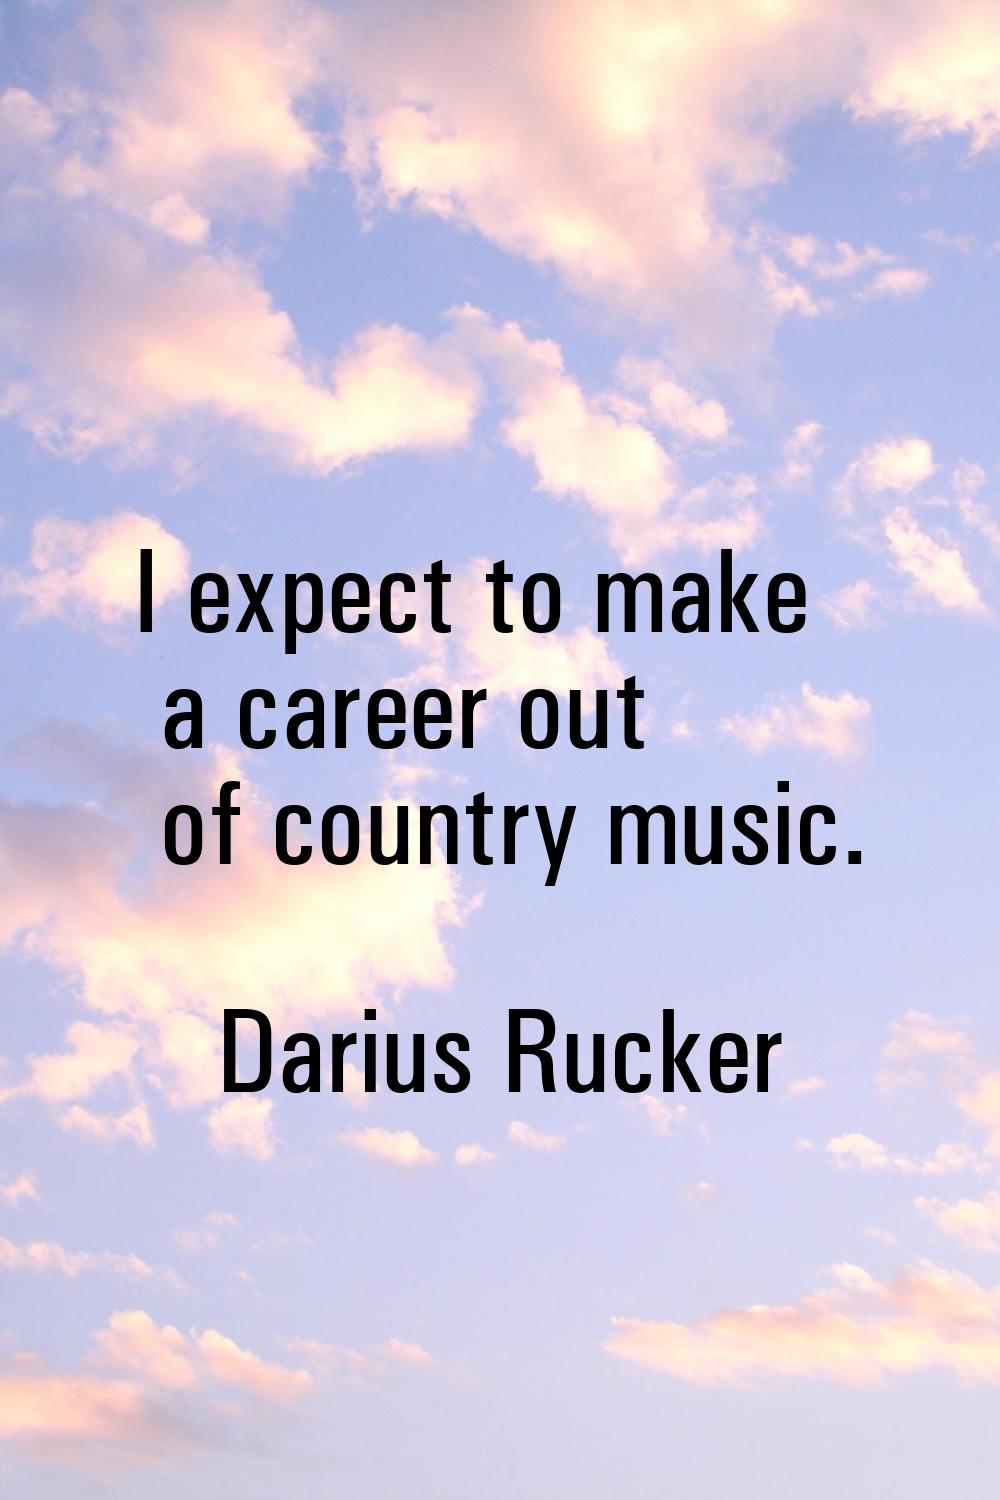 I expect to make a career out of country music.